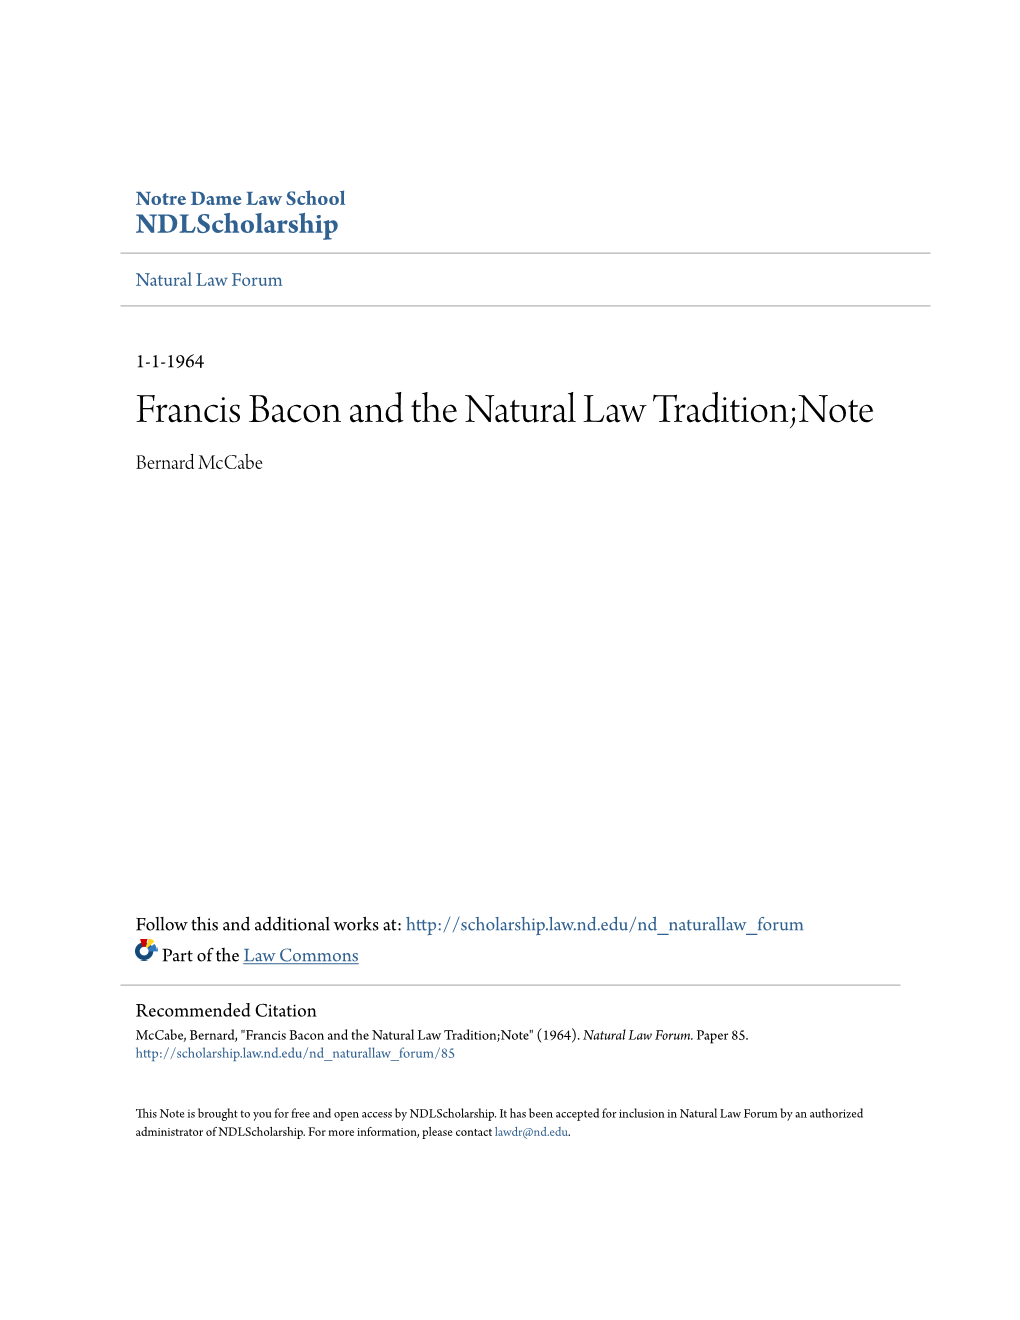 Francis Bacon and the Natural Law Tradition;Note Bernard Mccabe